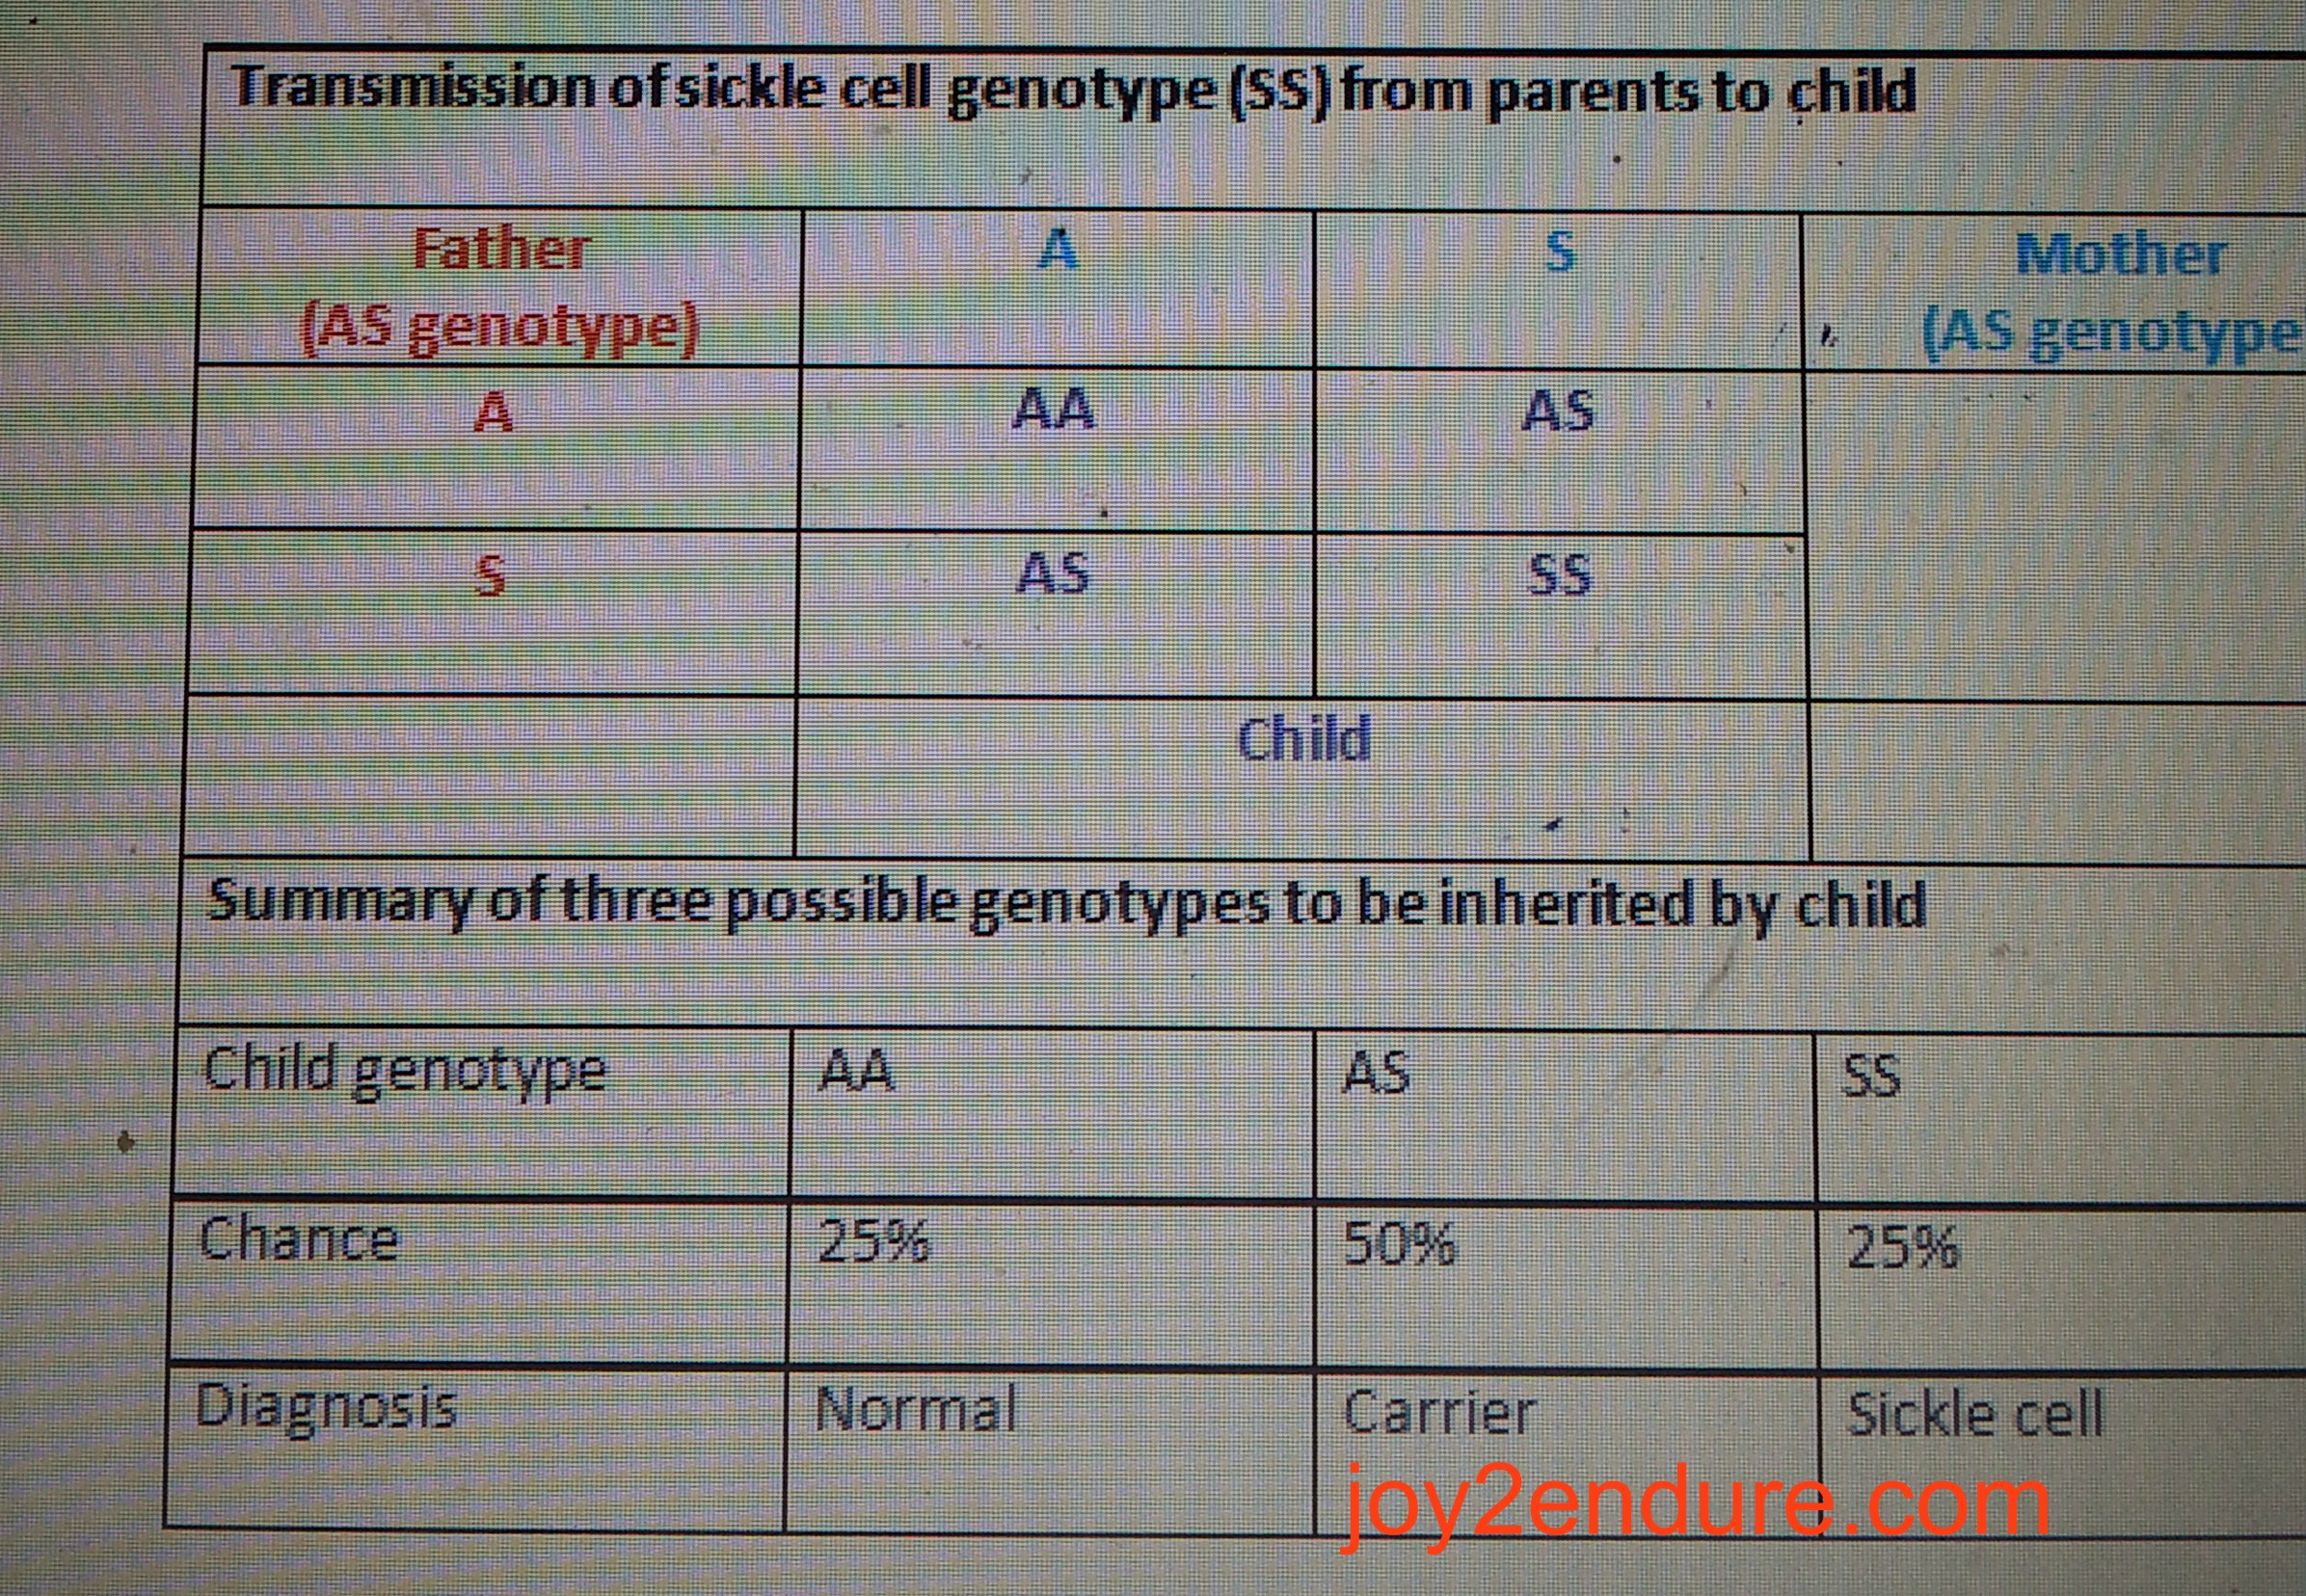 SICKLE CELL AWARENESS: Why It is Important to Know Your Genotype.